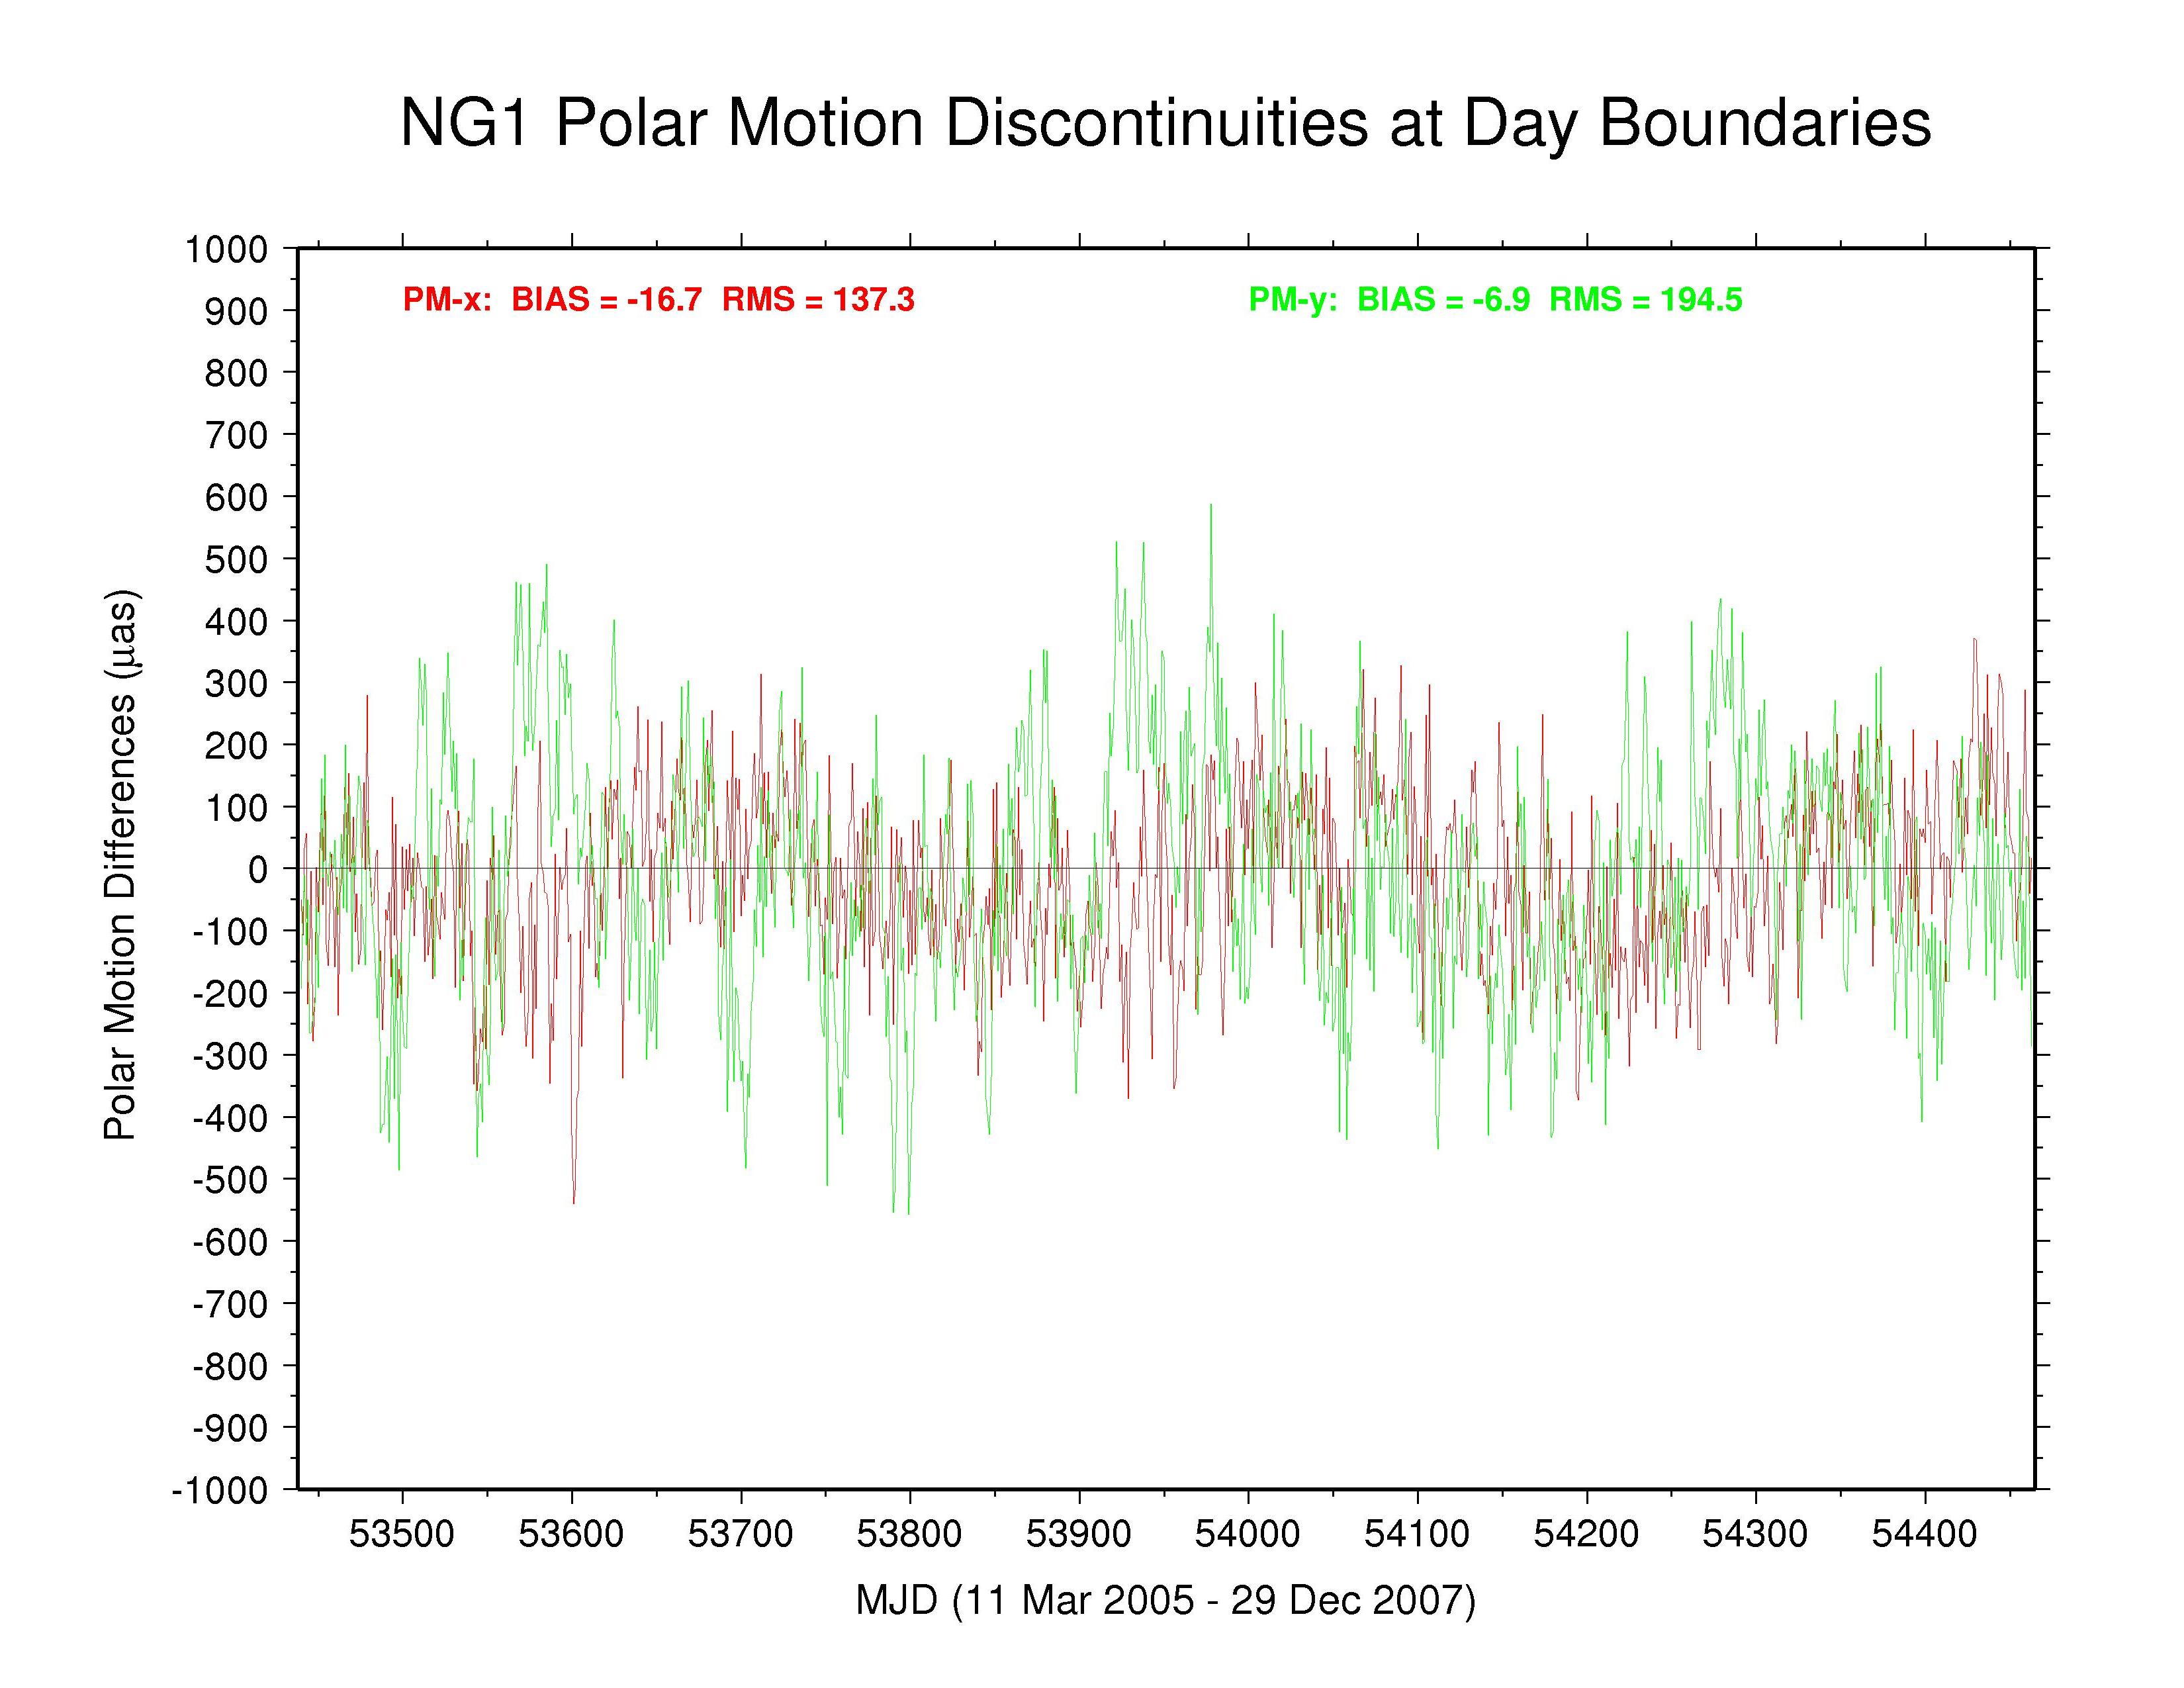 NGS polar motion discontinuities